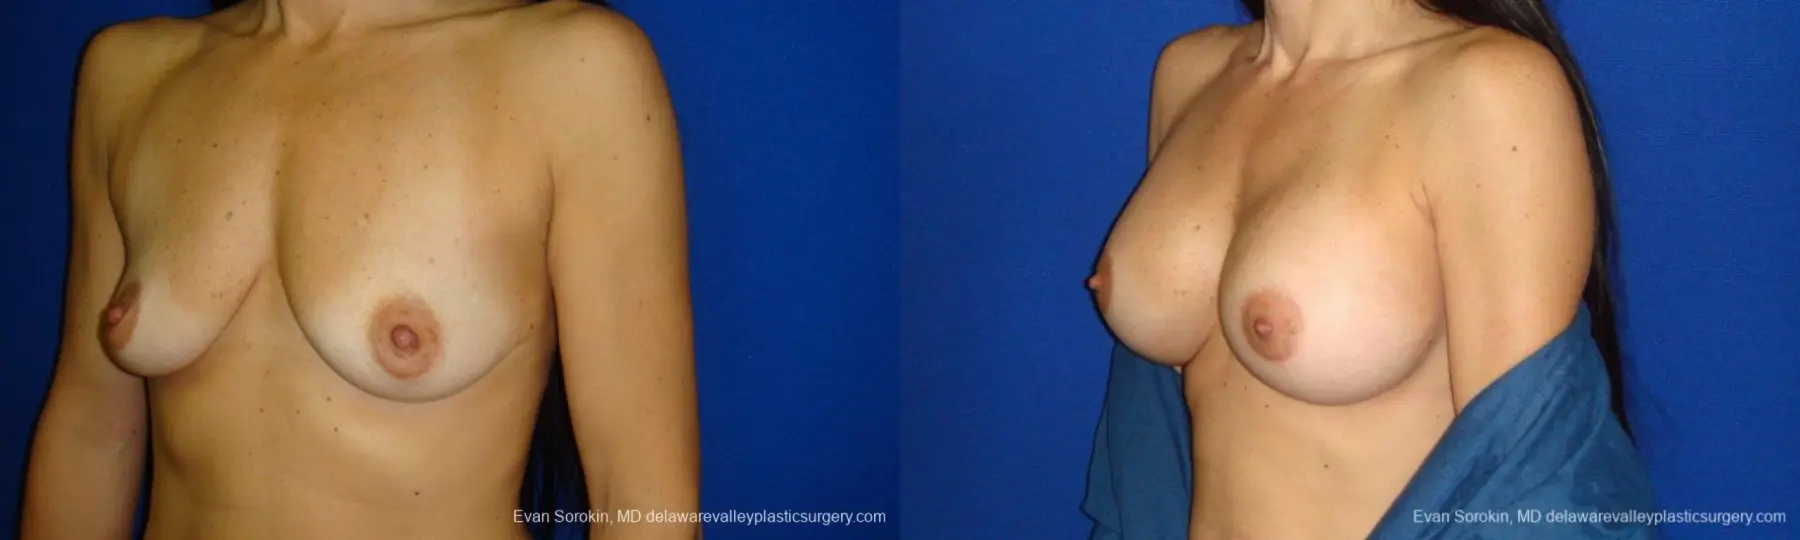 Philadelphia Breast Augmentation 9413 - Before and After 4